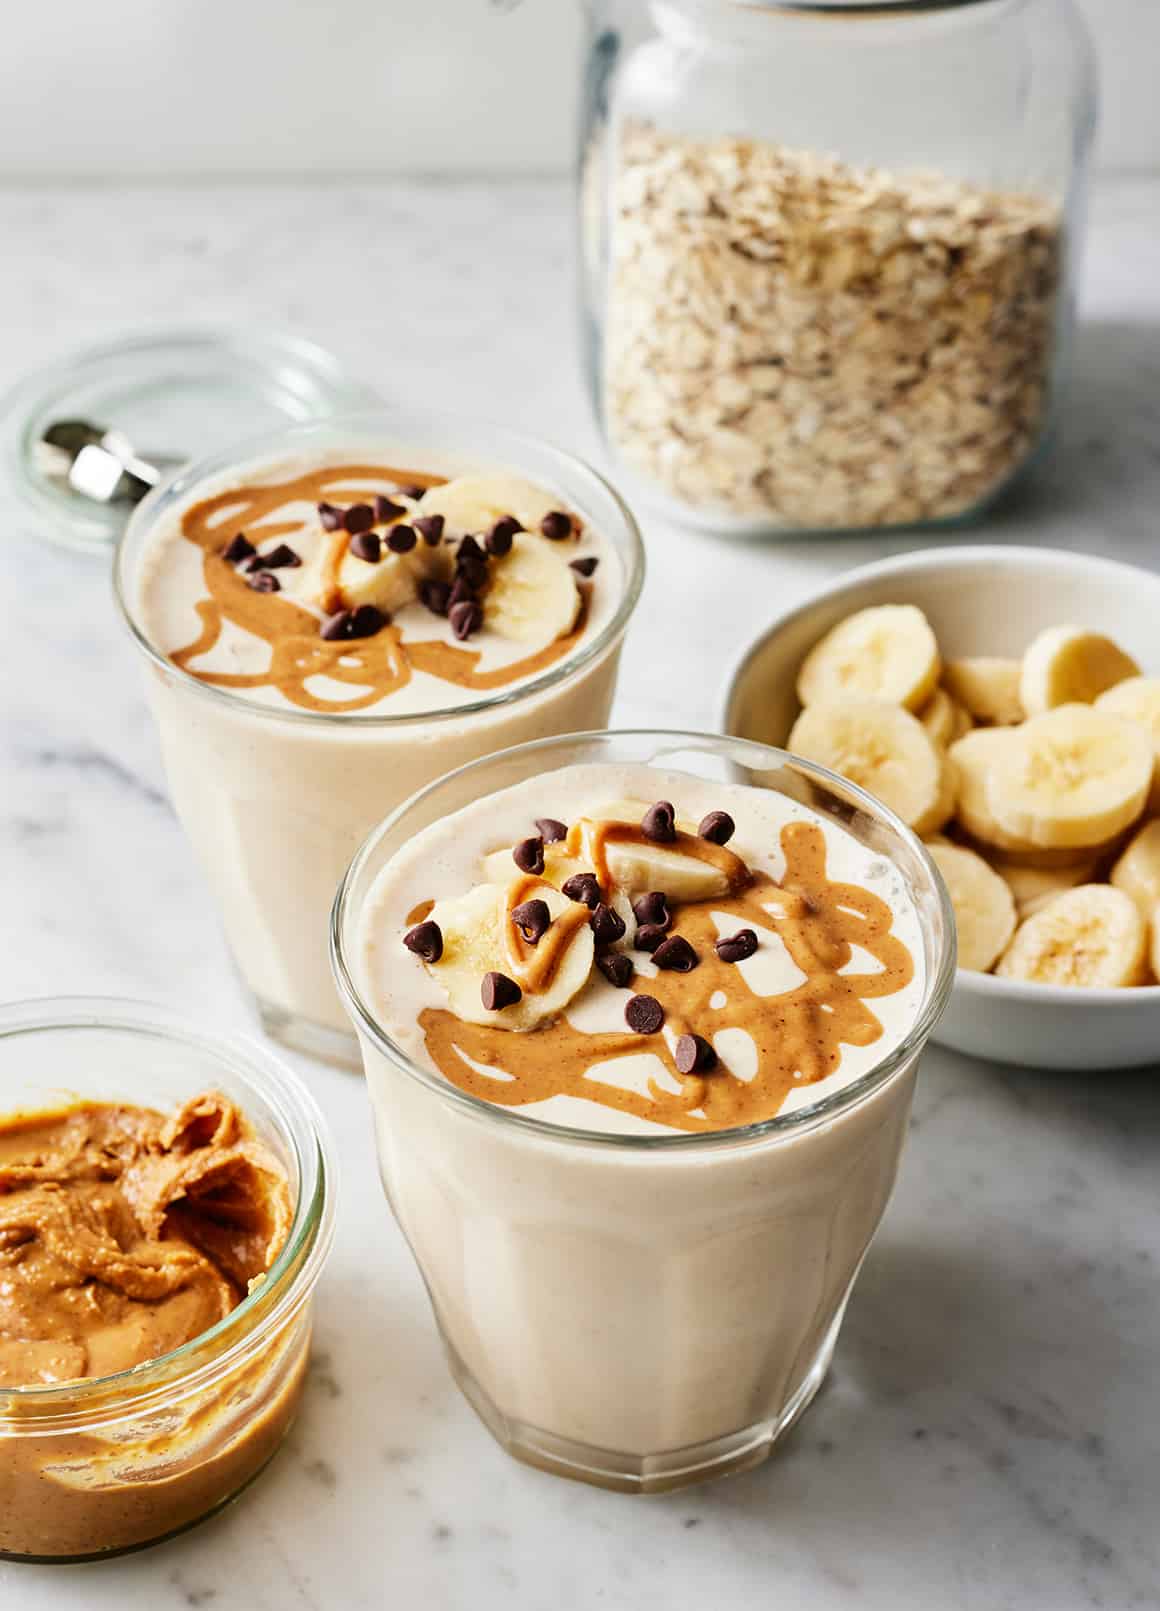 Peanut butter banana smoothies